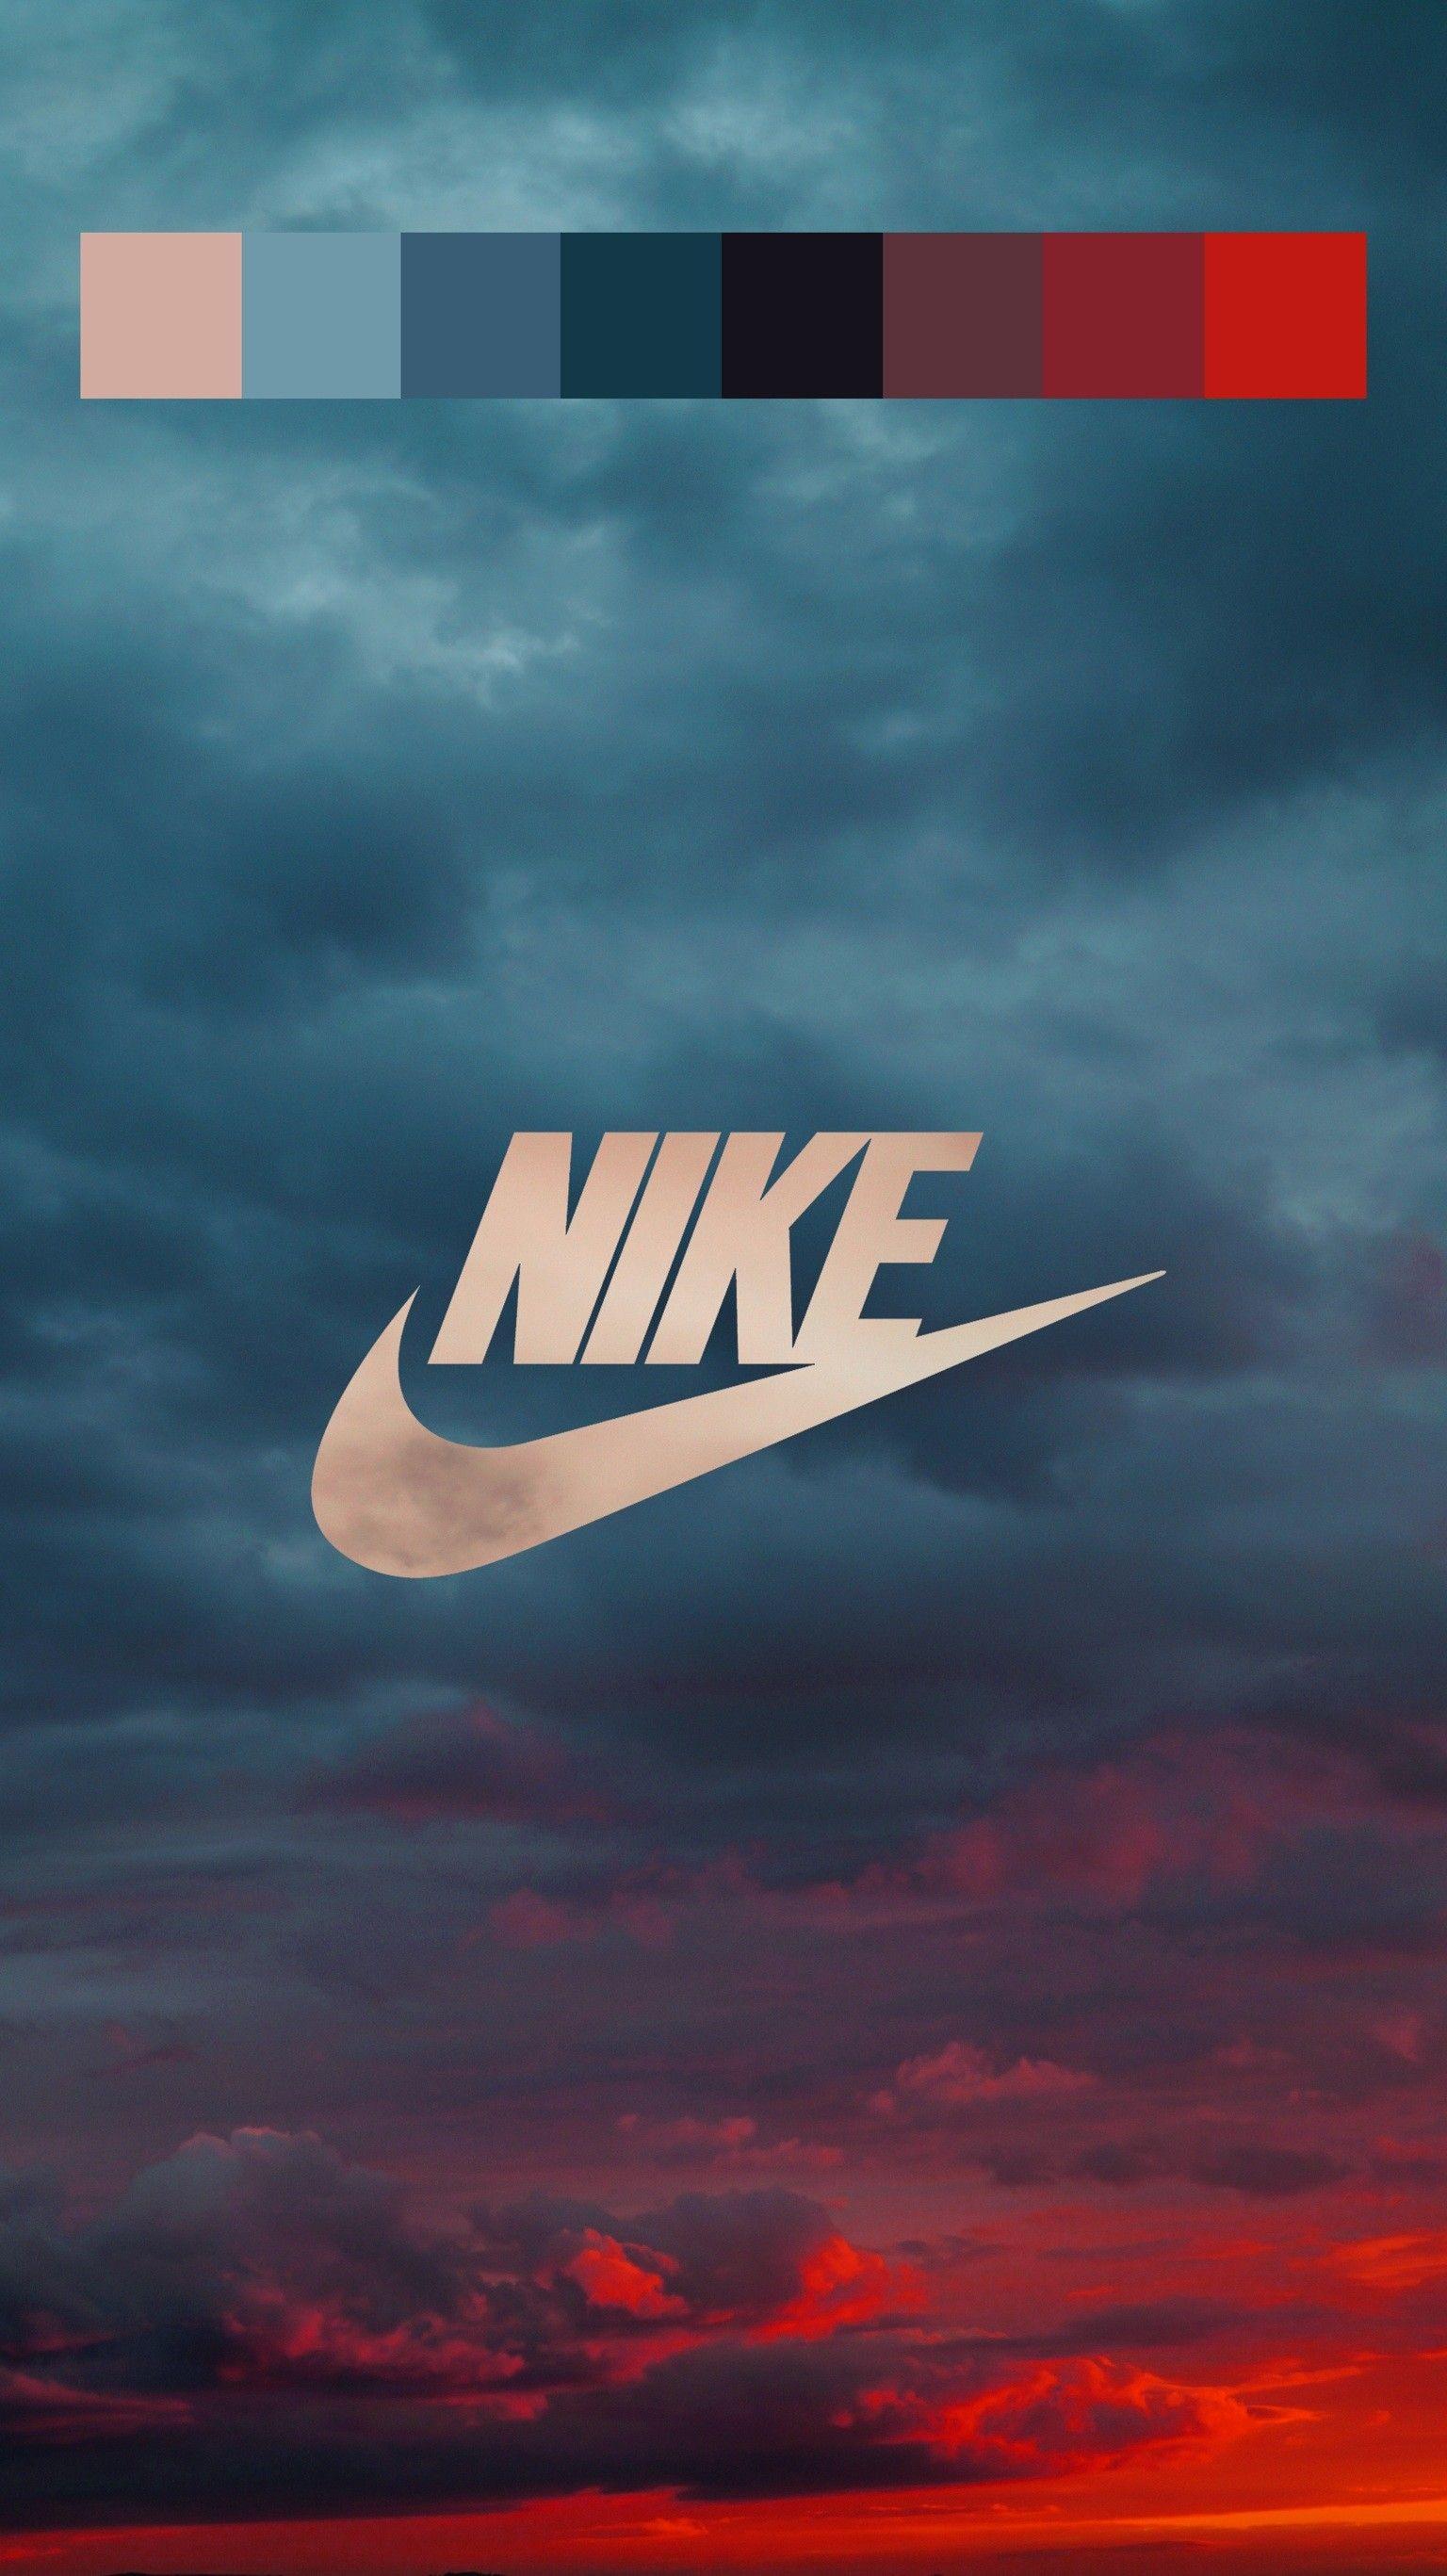 iPhone Wallpaper, Adidas, iPhone Background. more Nike. Nike wallpaper, Adidas iphone wallpaper, Hypebeast iphone wallpaper